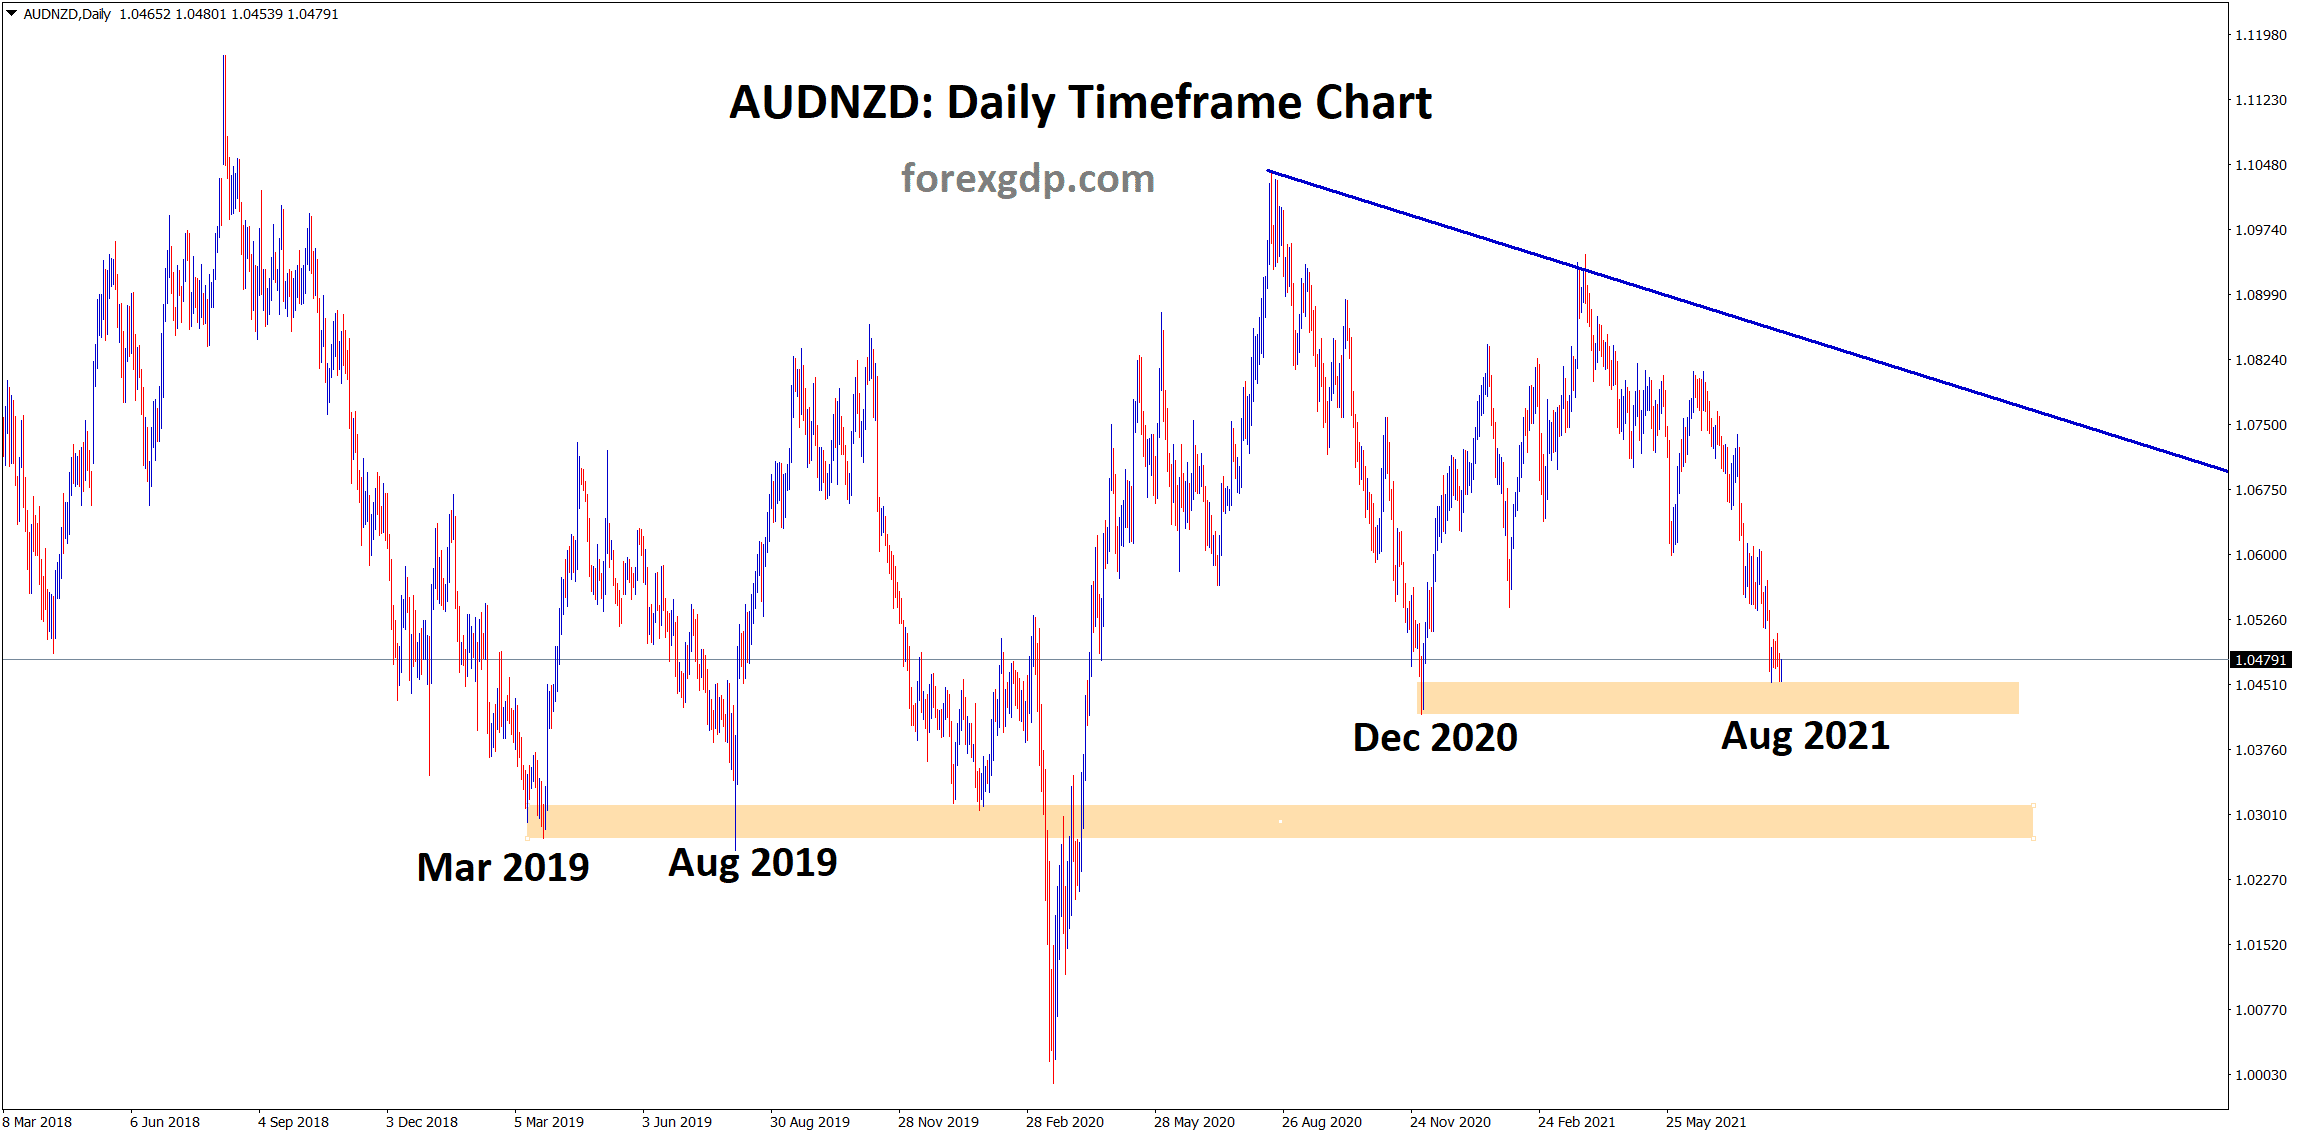 AUDNZD is standing now at the December 2020 support area